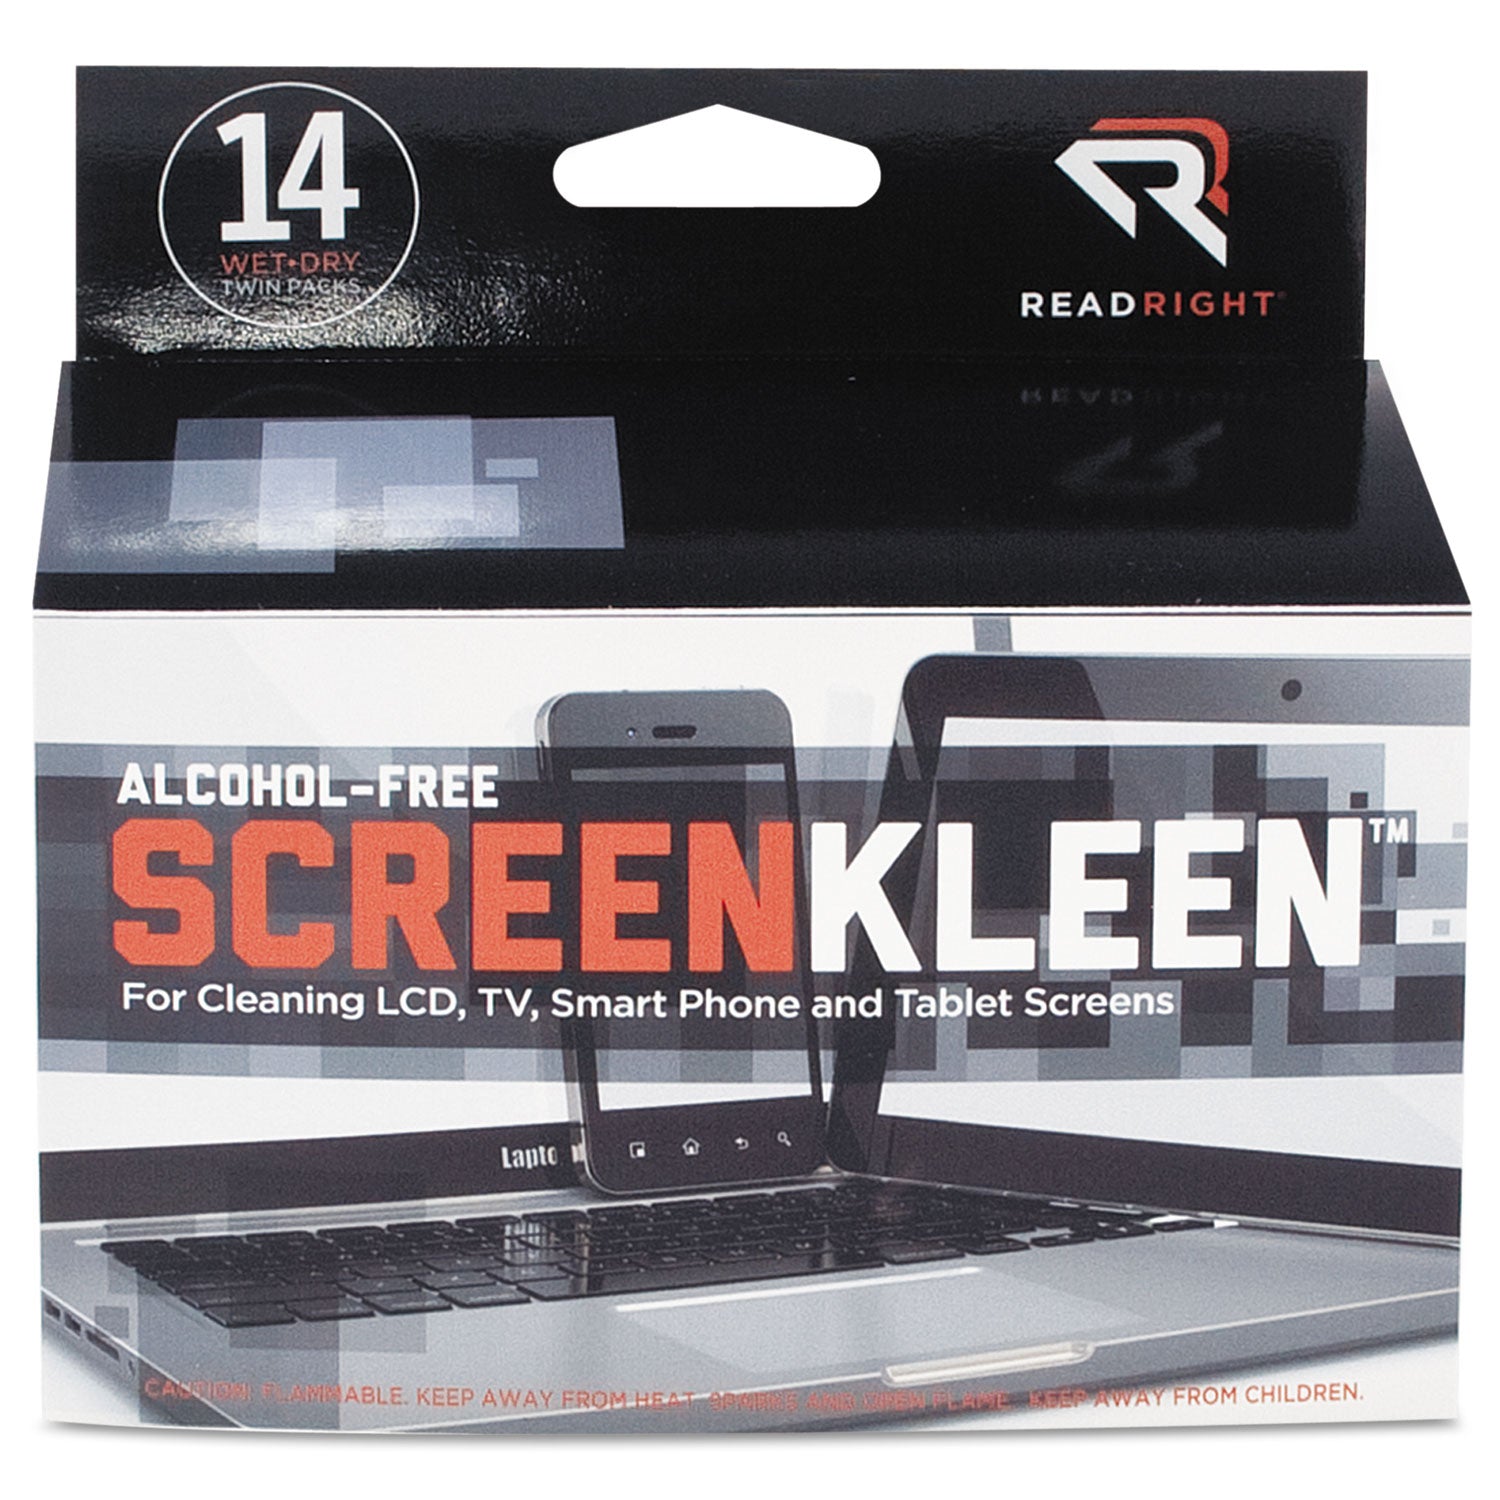 ScreenKleen Alcohol-Free Wipes, Cloth, 5 x 5, Unscented, 14/Box - 